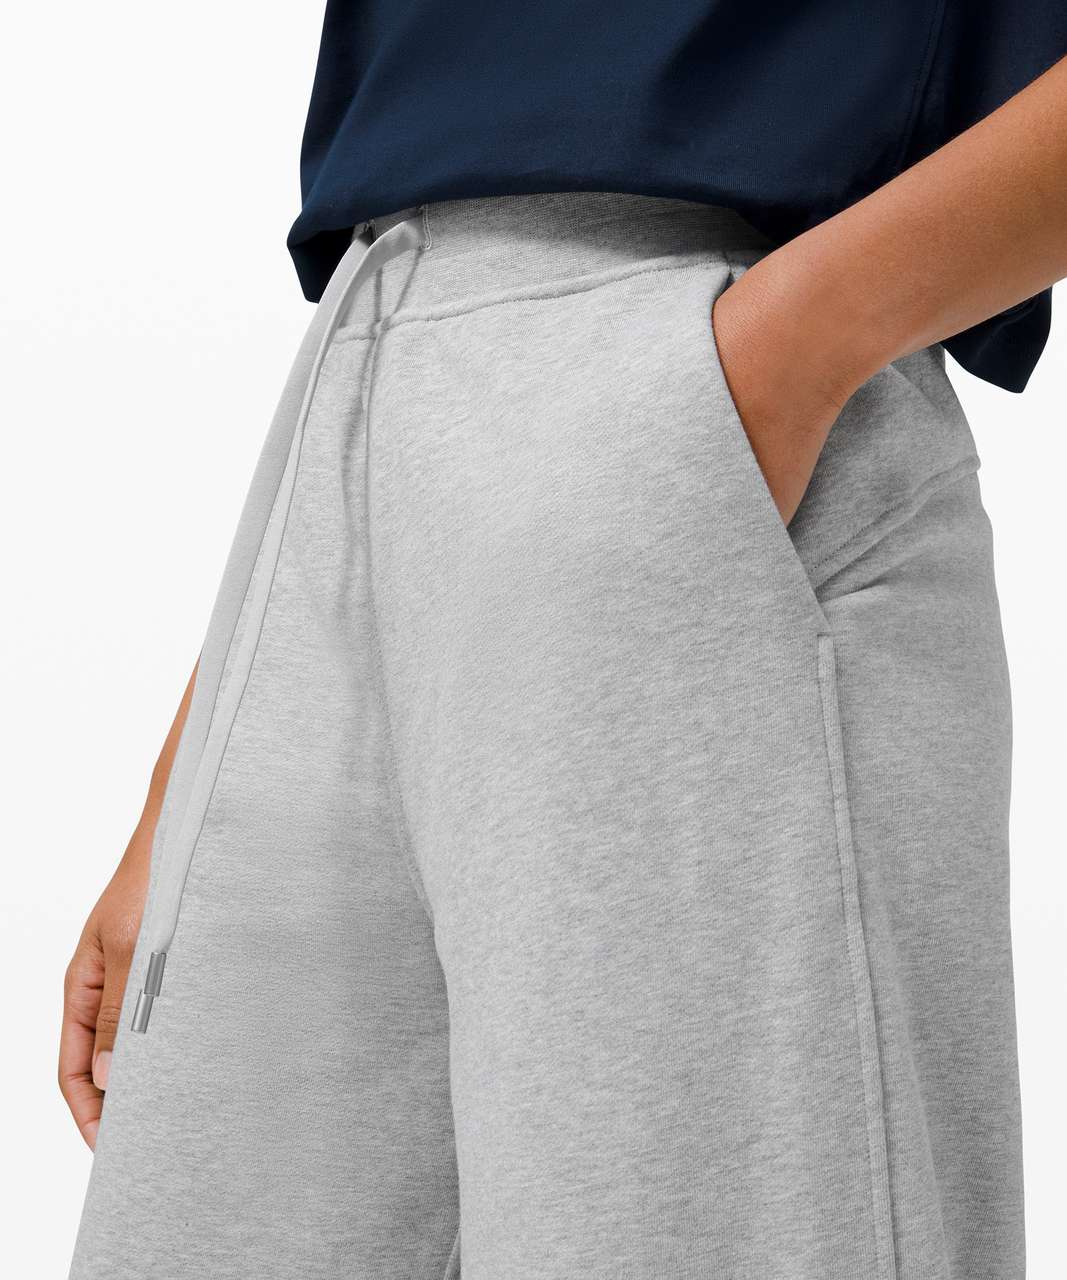 Lululemon Relaxed Fit French Terry Jogger - Heathered Core Light Grey